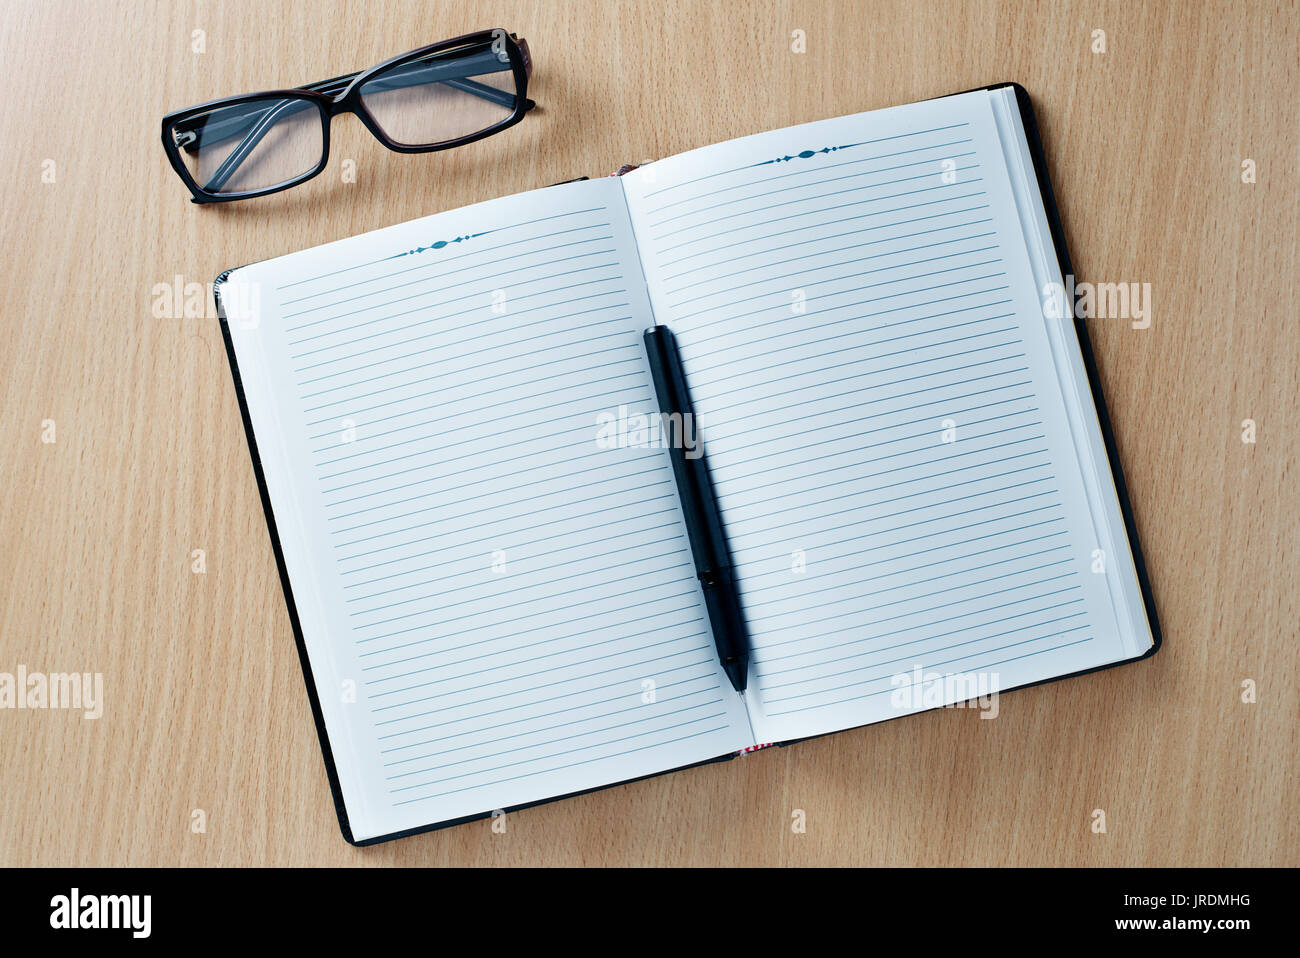 Open diary or office journal with a double page lined blank spread for your text with a ballpoint pen and glasses on a wooden desk, overhead view Stock Photo